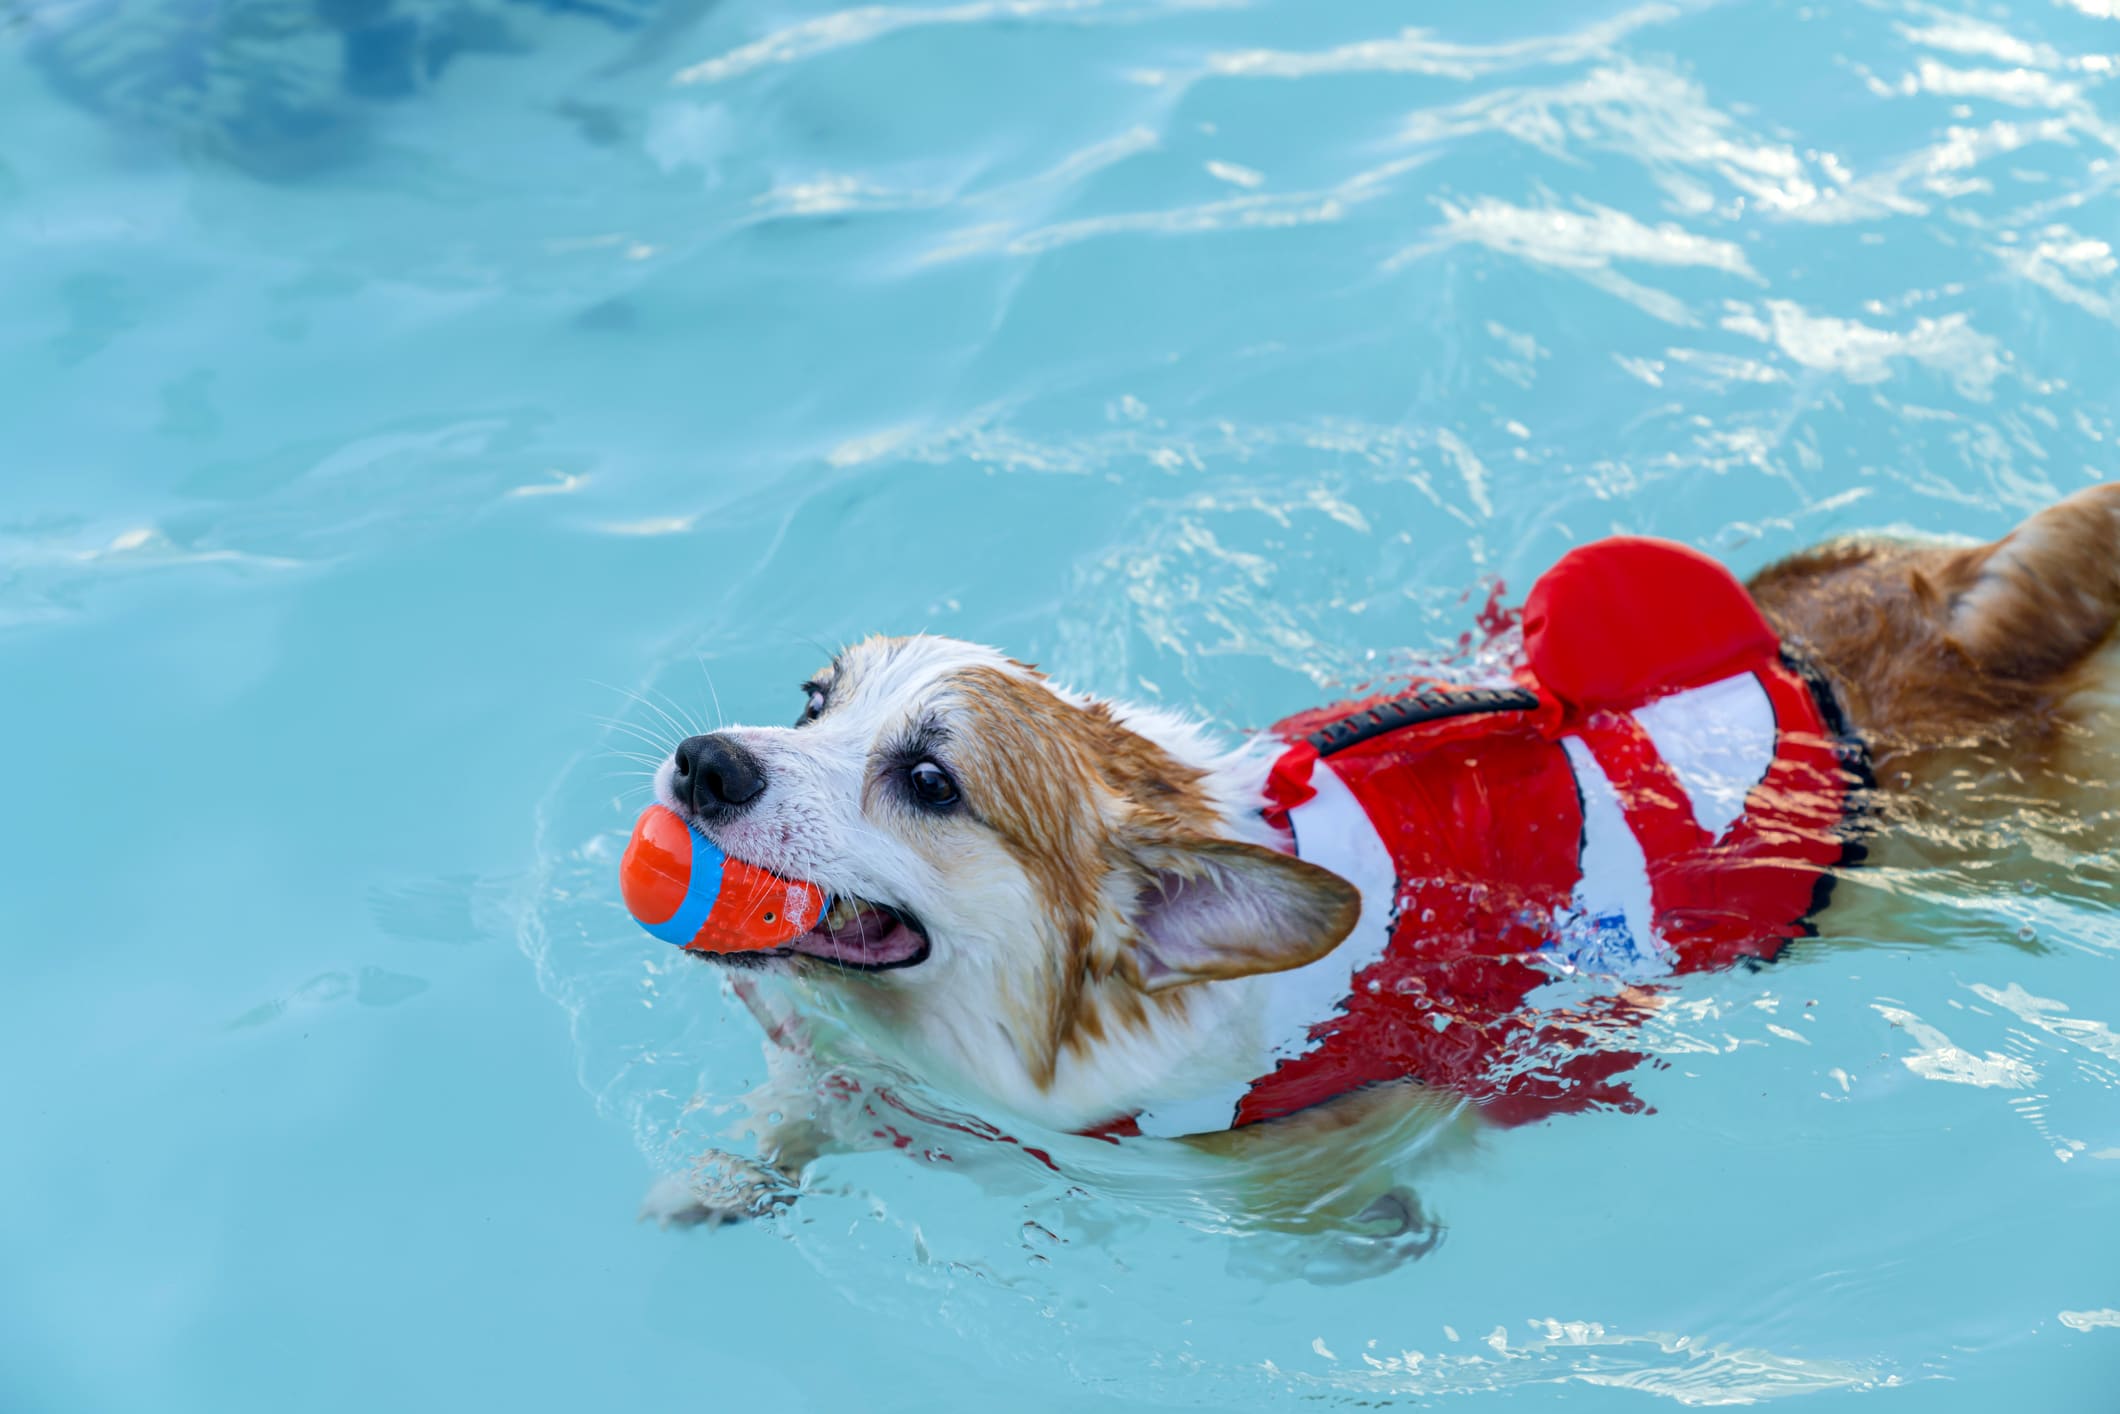 Welsh corgi swimming in the swimming pool,High Angle View Of Dog Swimming In Pool